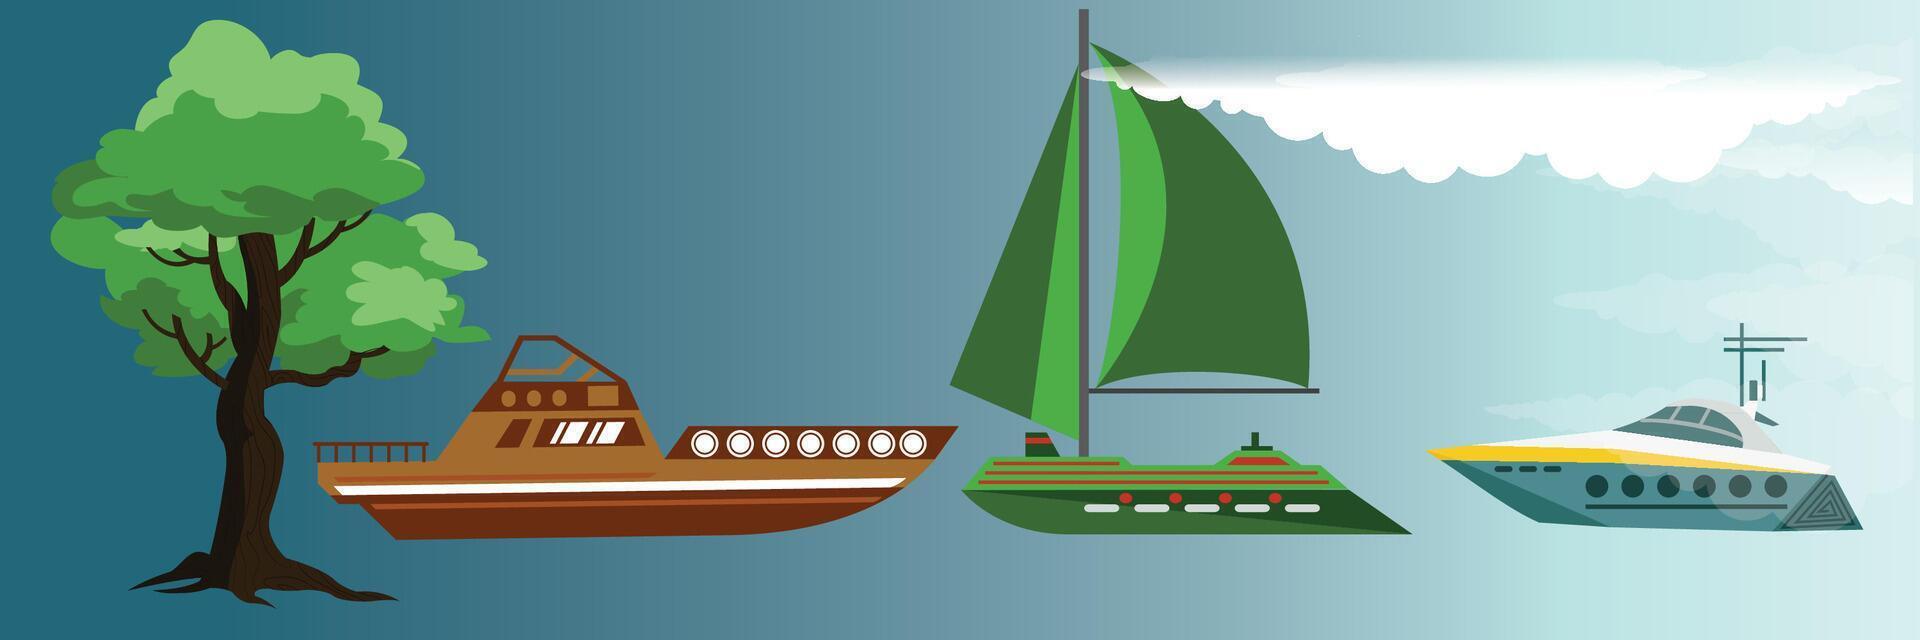 Sea boat with water and trees. various types of ships. colored ships vector